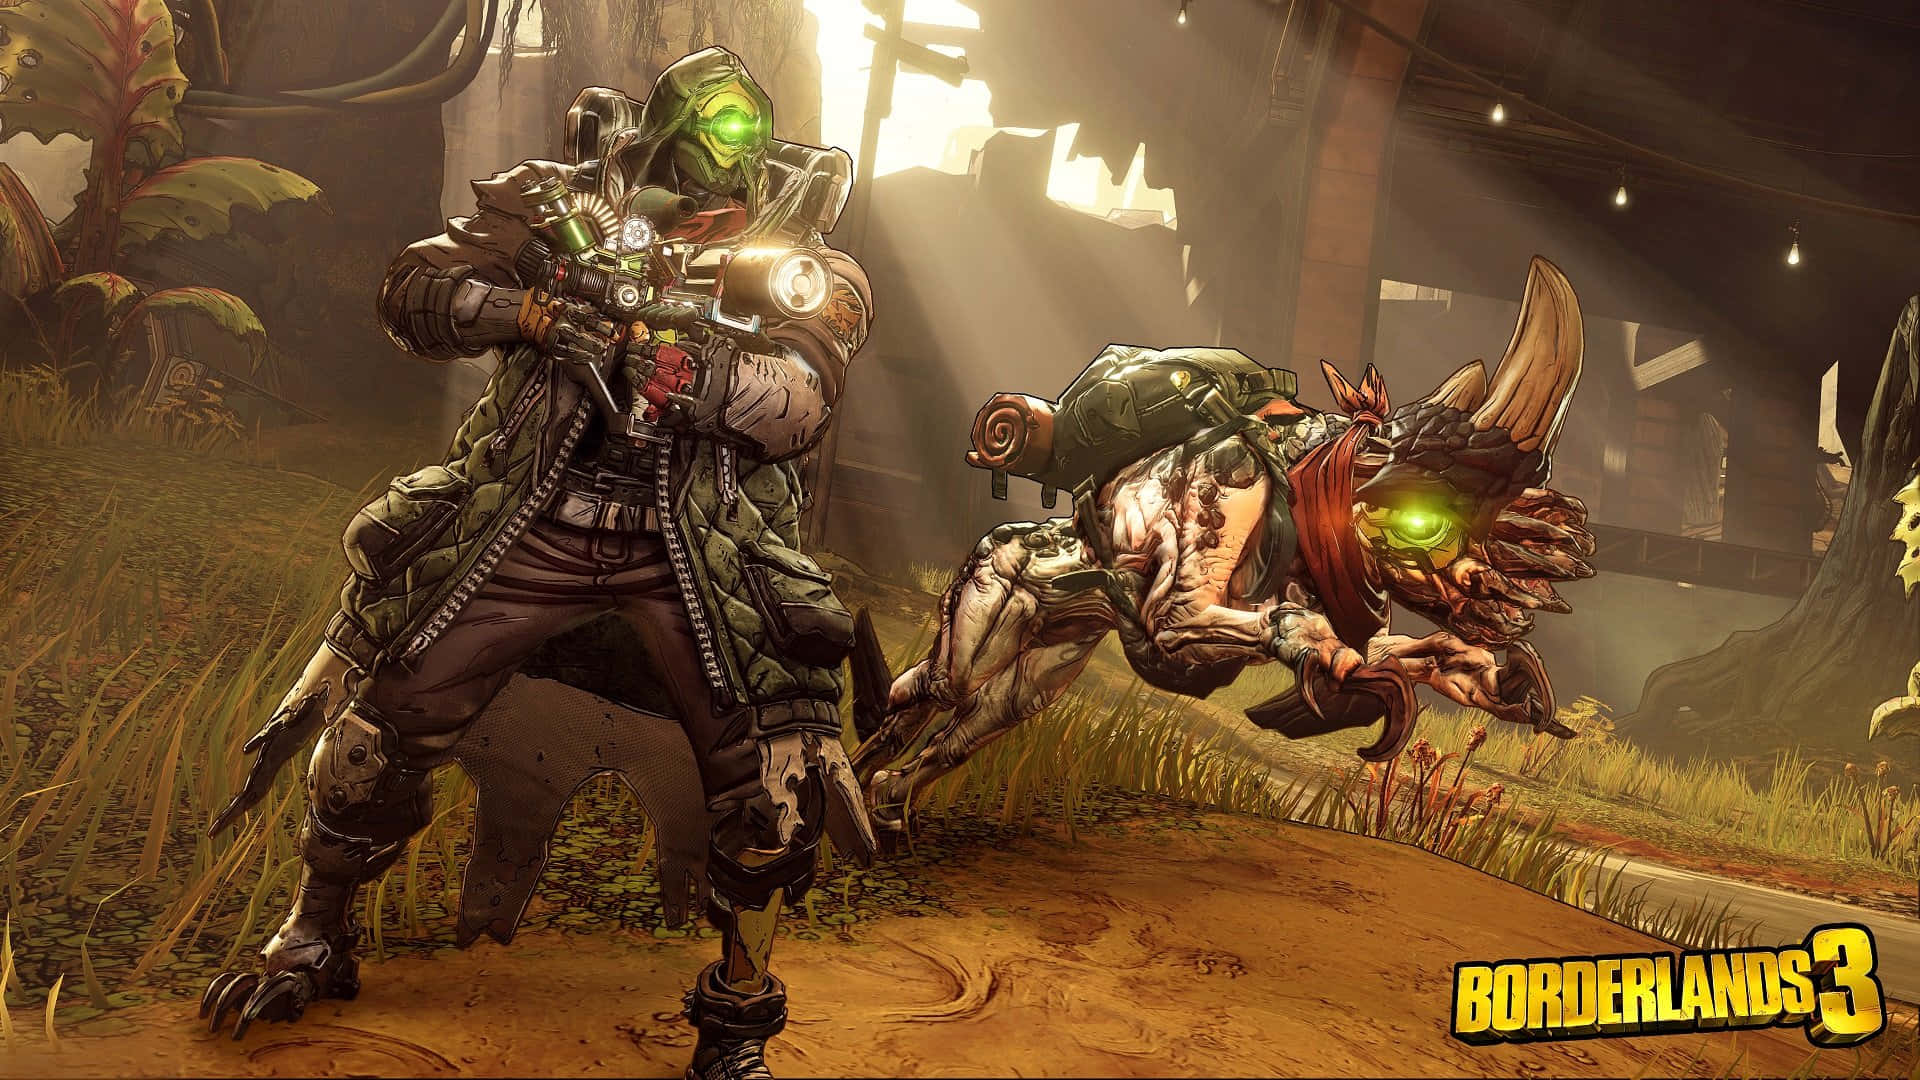 Enter a world of alien loot and mayhem with HD Borderlands 3